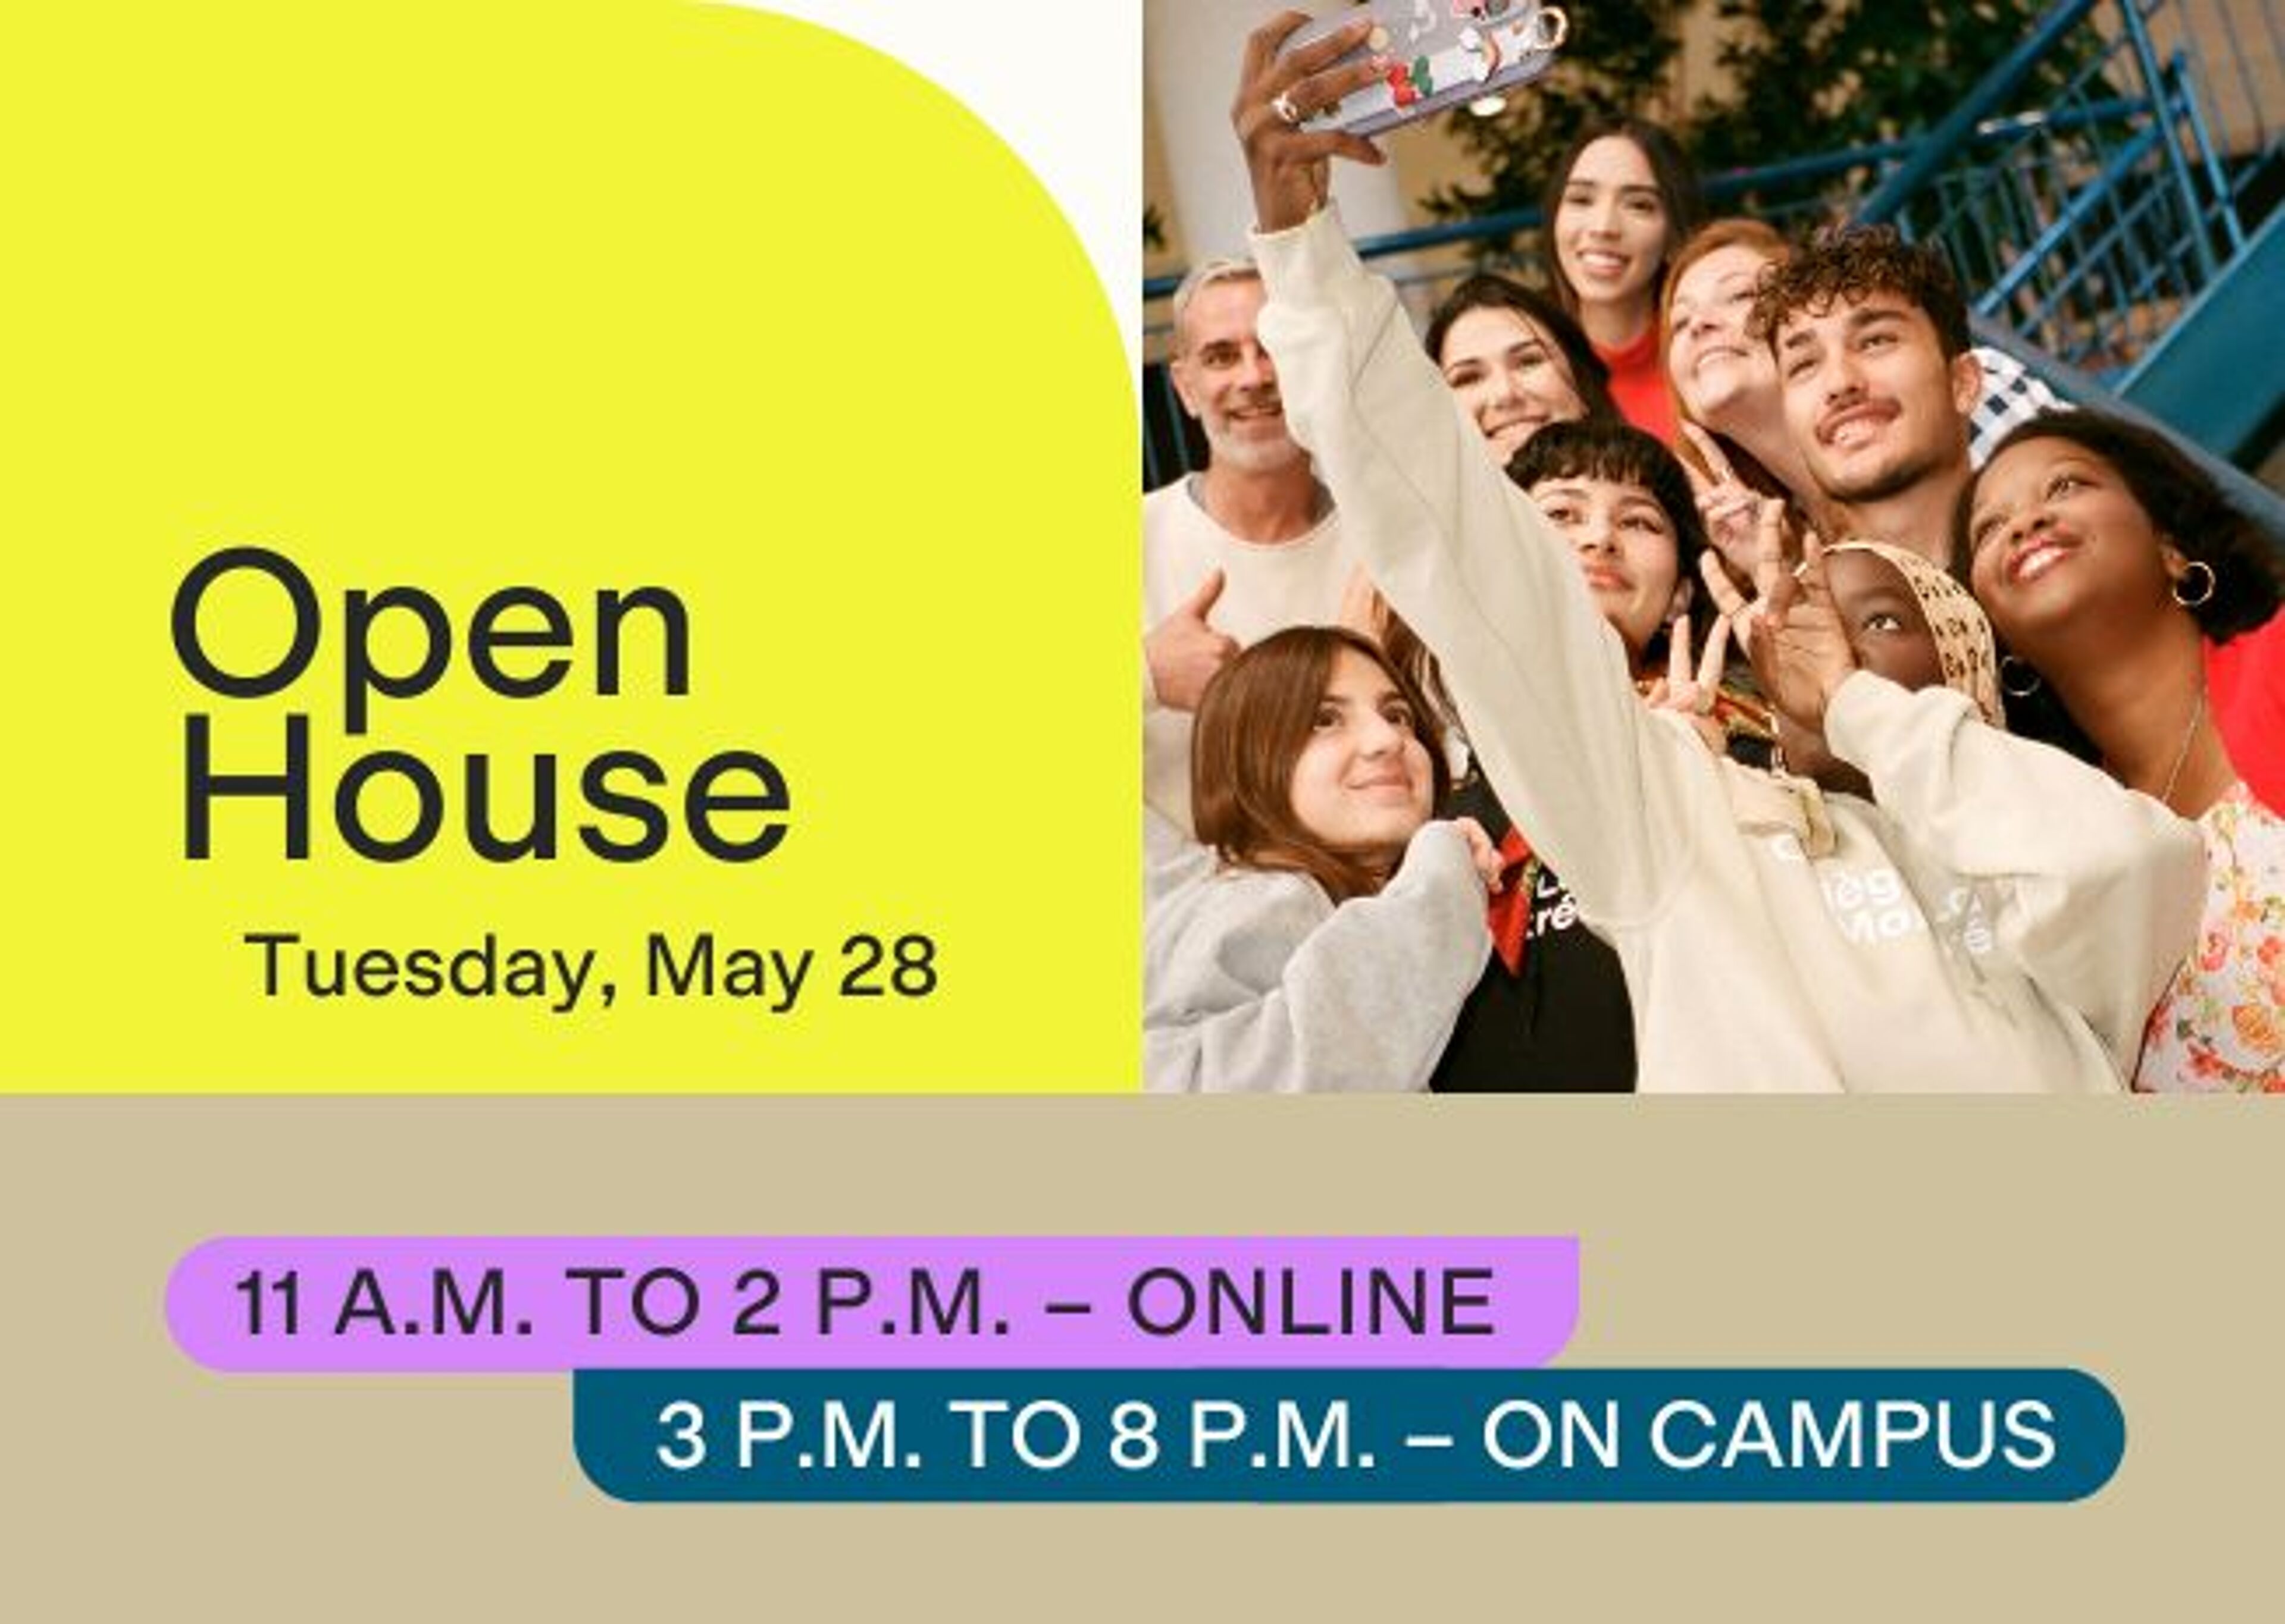 Advertisement for an Open House event on May 28, with sessions online from 11 AM to 2 PM, and on campus from 3 PM to 8 PM.